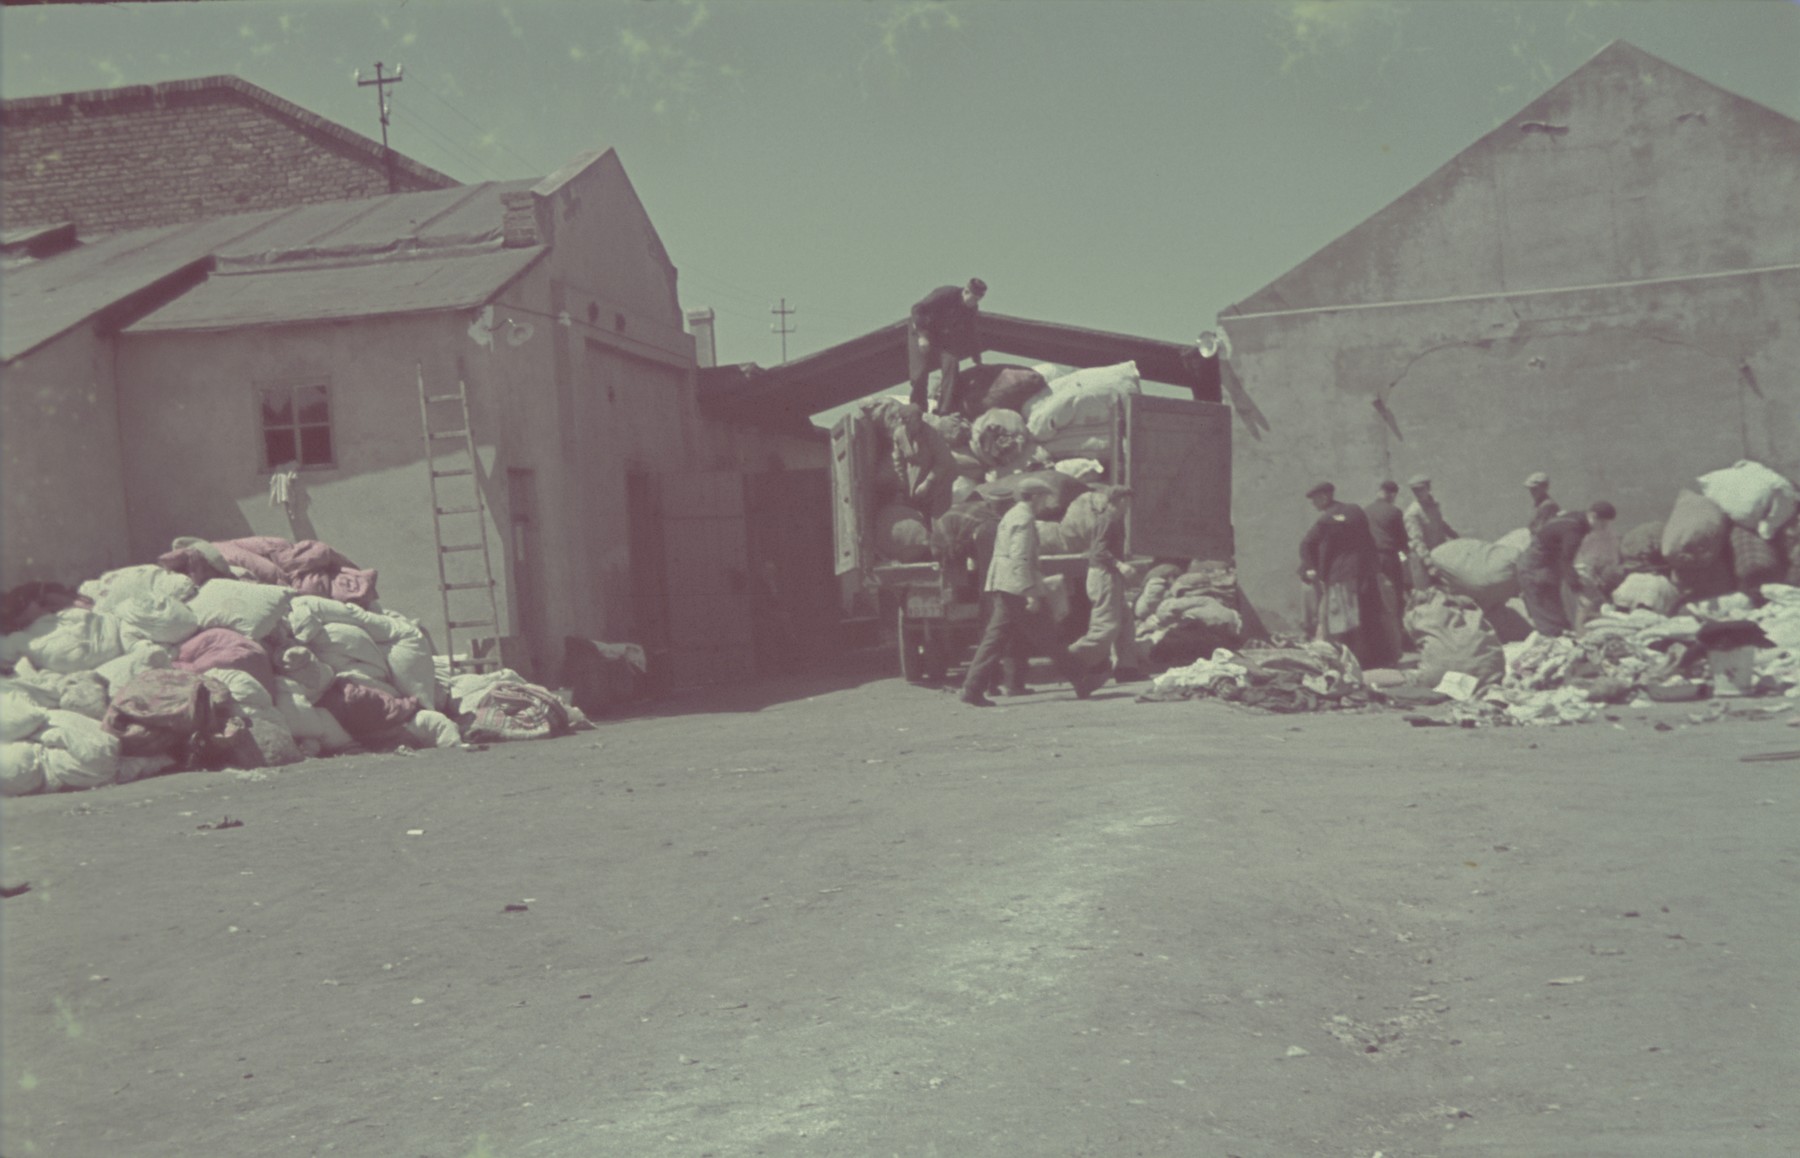 Jews load bales of confiscated goods onto trucks in the Pabianice labor camp/storage facility.

Original German caption: "Pabianice, Verladung" (loading), #34.